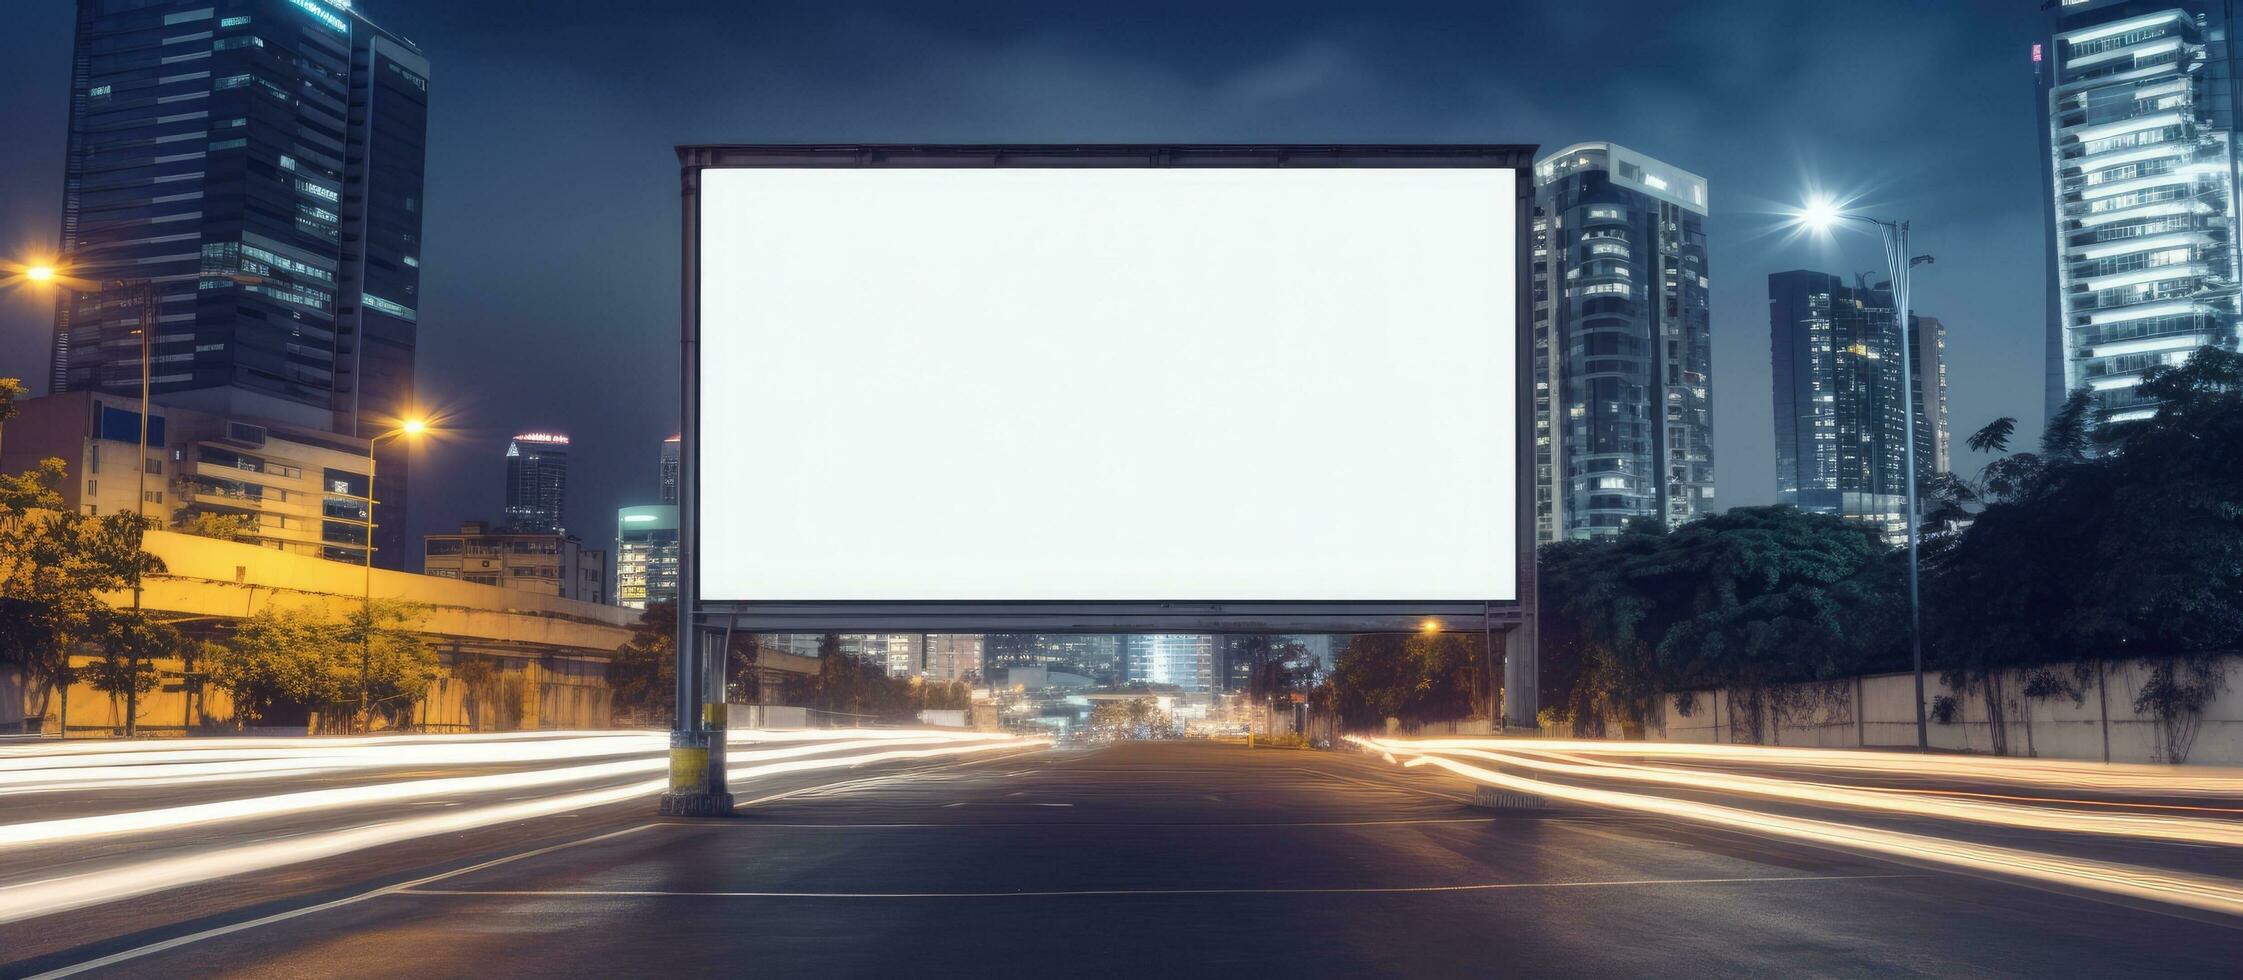 A blank billboard with space for text or content is depicted in a mockup in a big city during photo